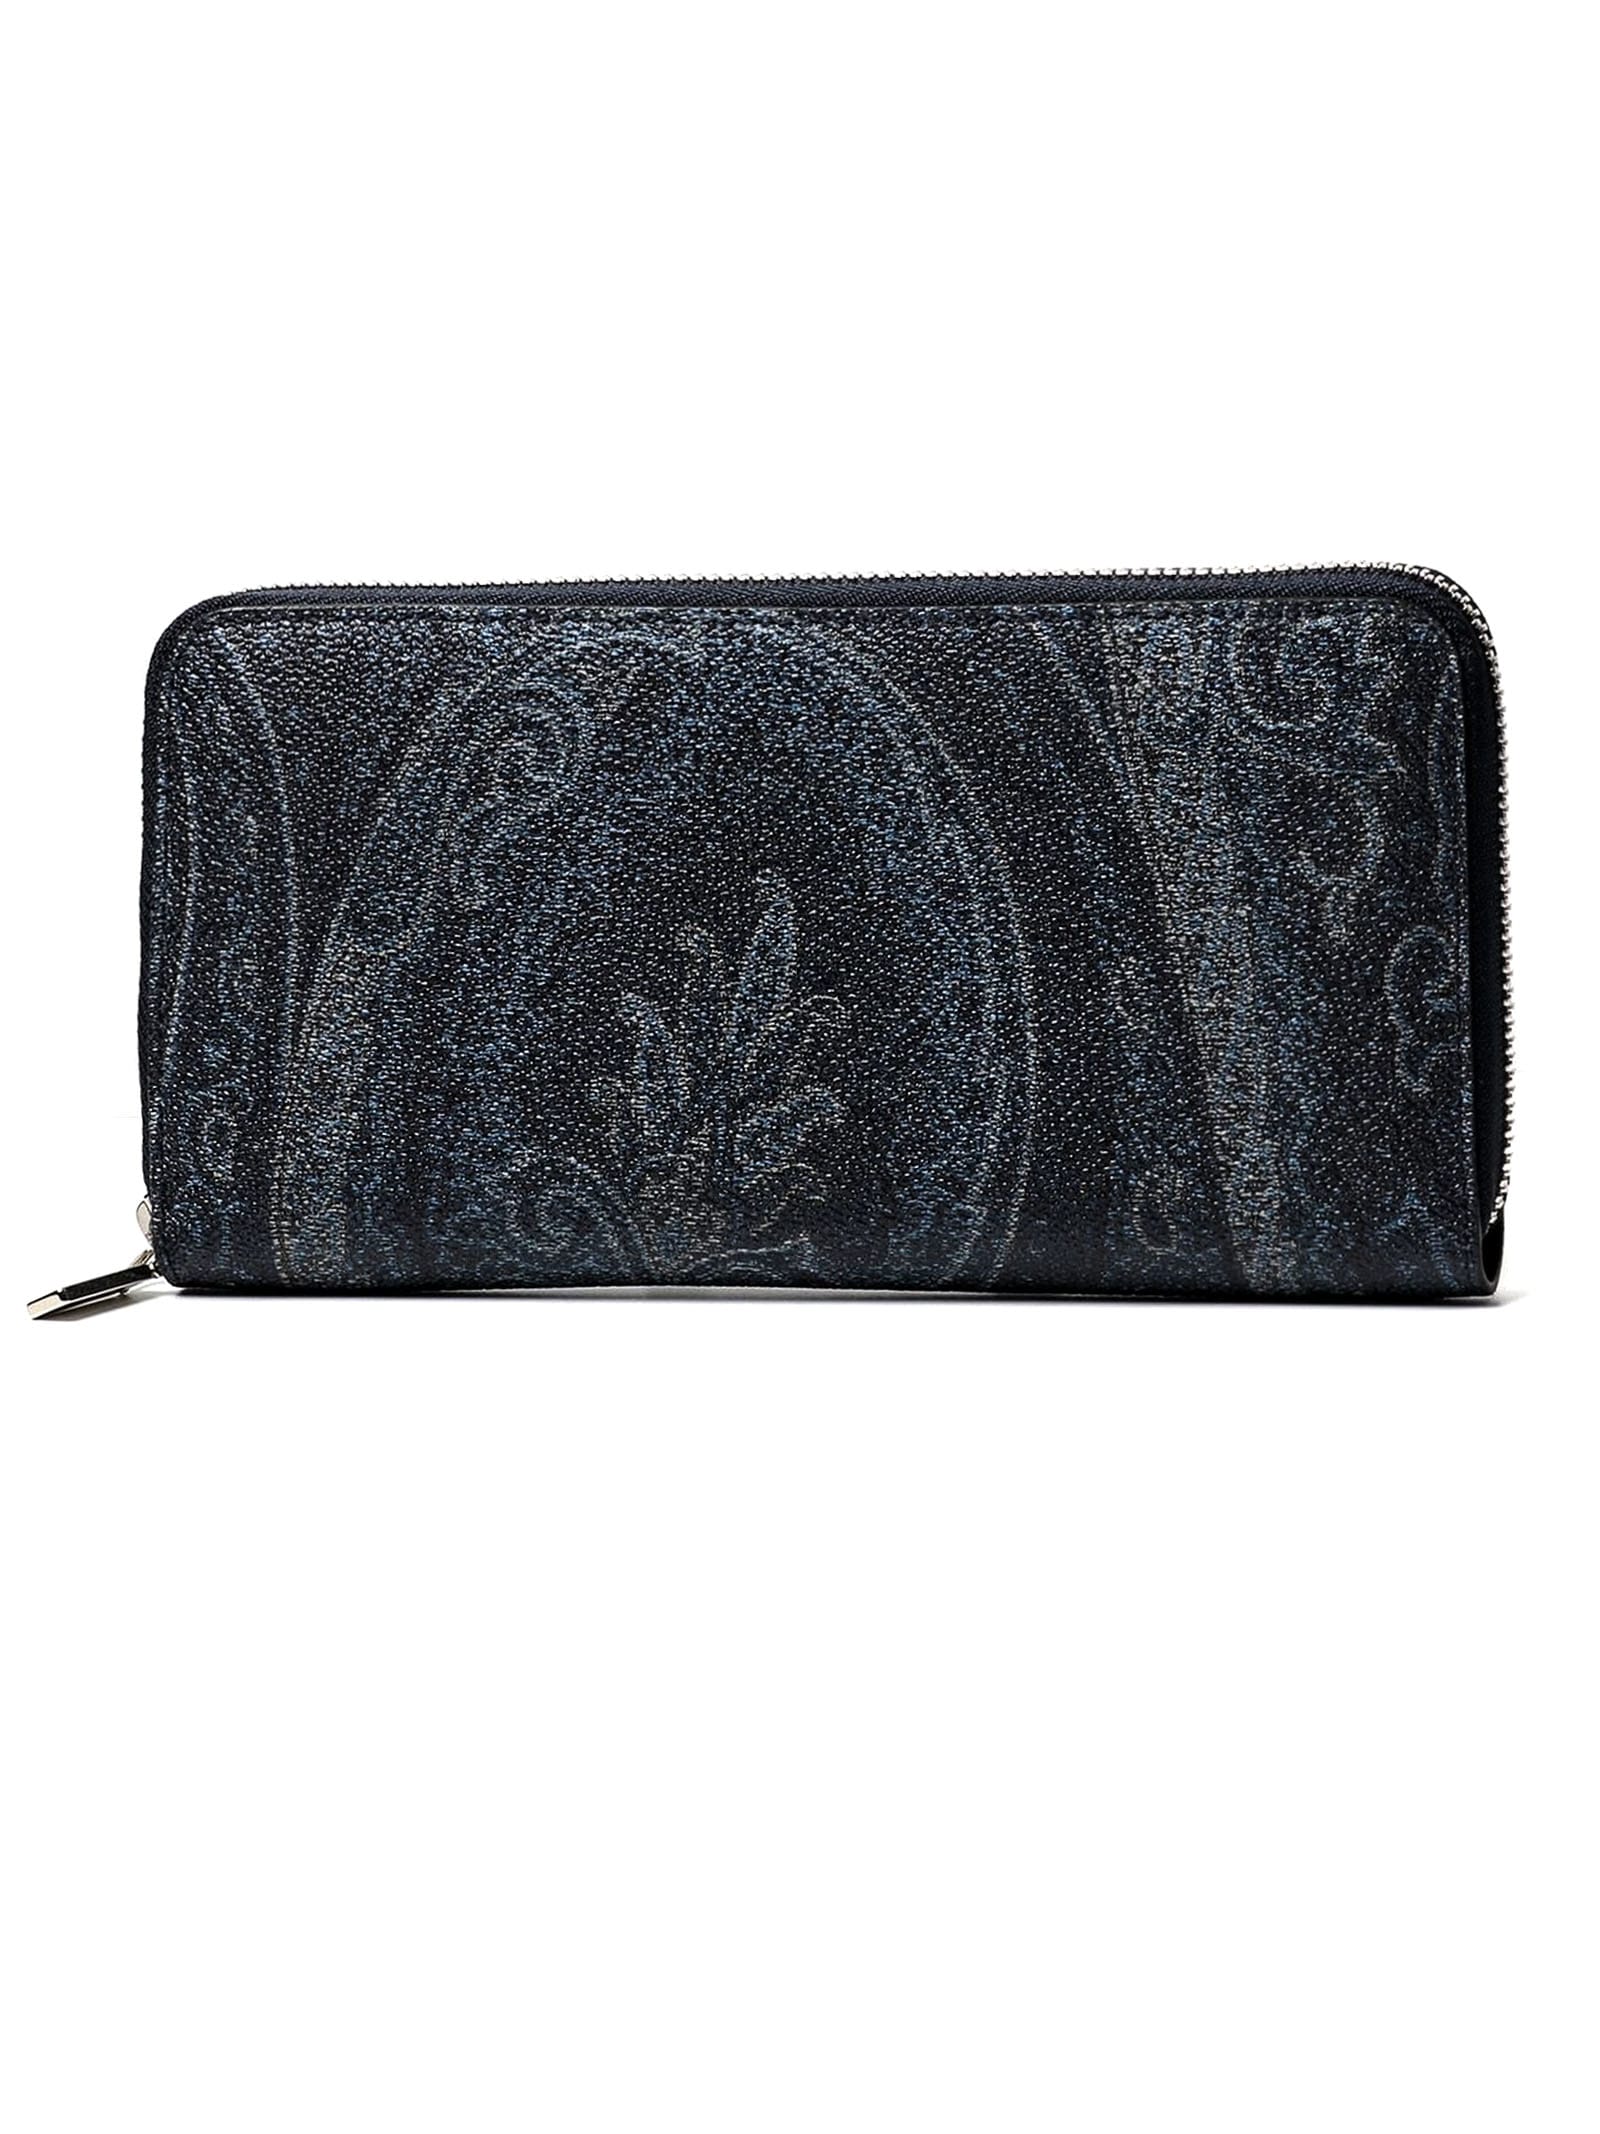 Etro Black Leather Continental Wallet